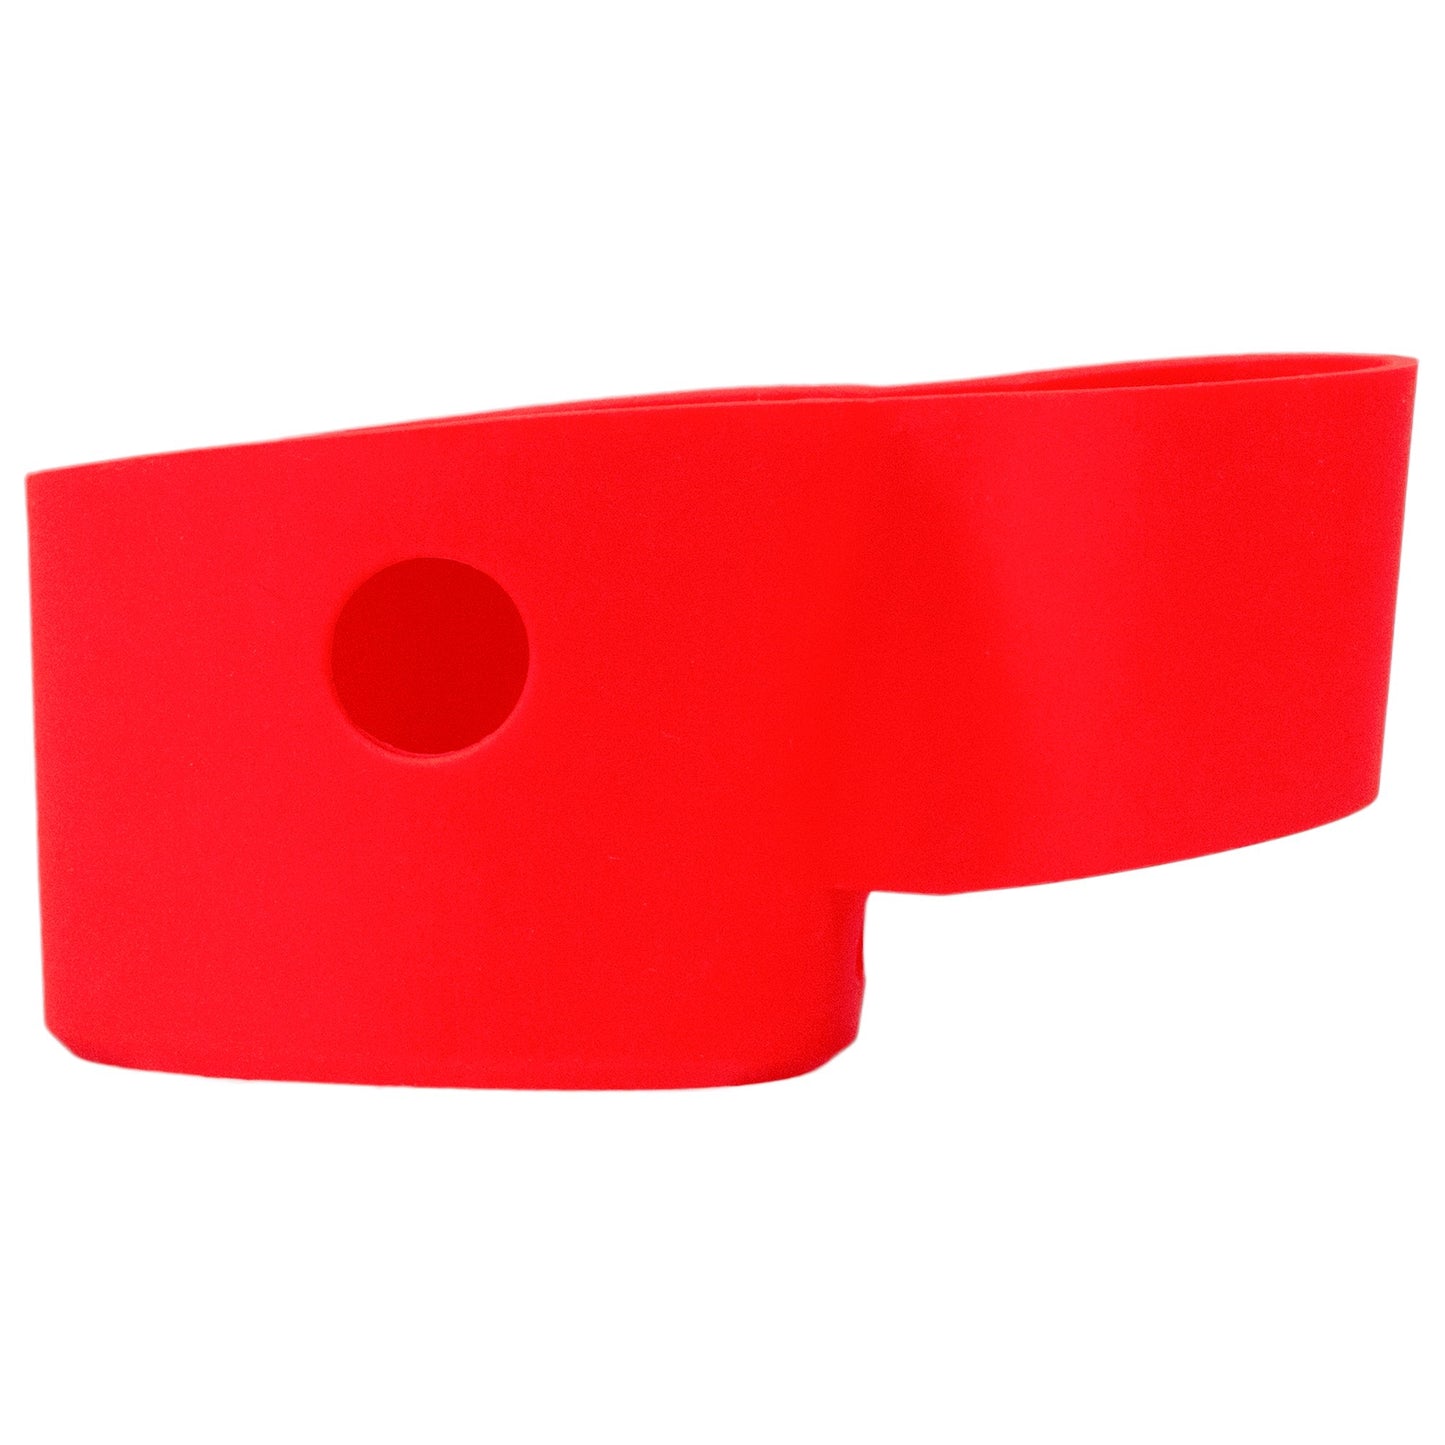 The CORE Silicone Sleeves Everything Else Shenzhen Crossing Red 